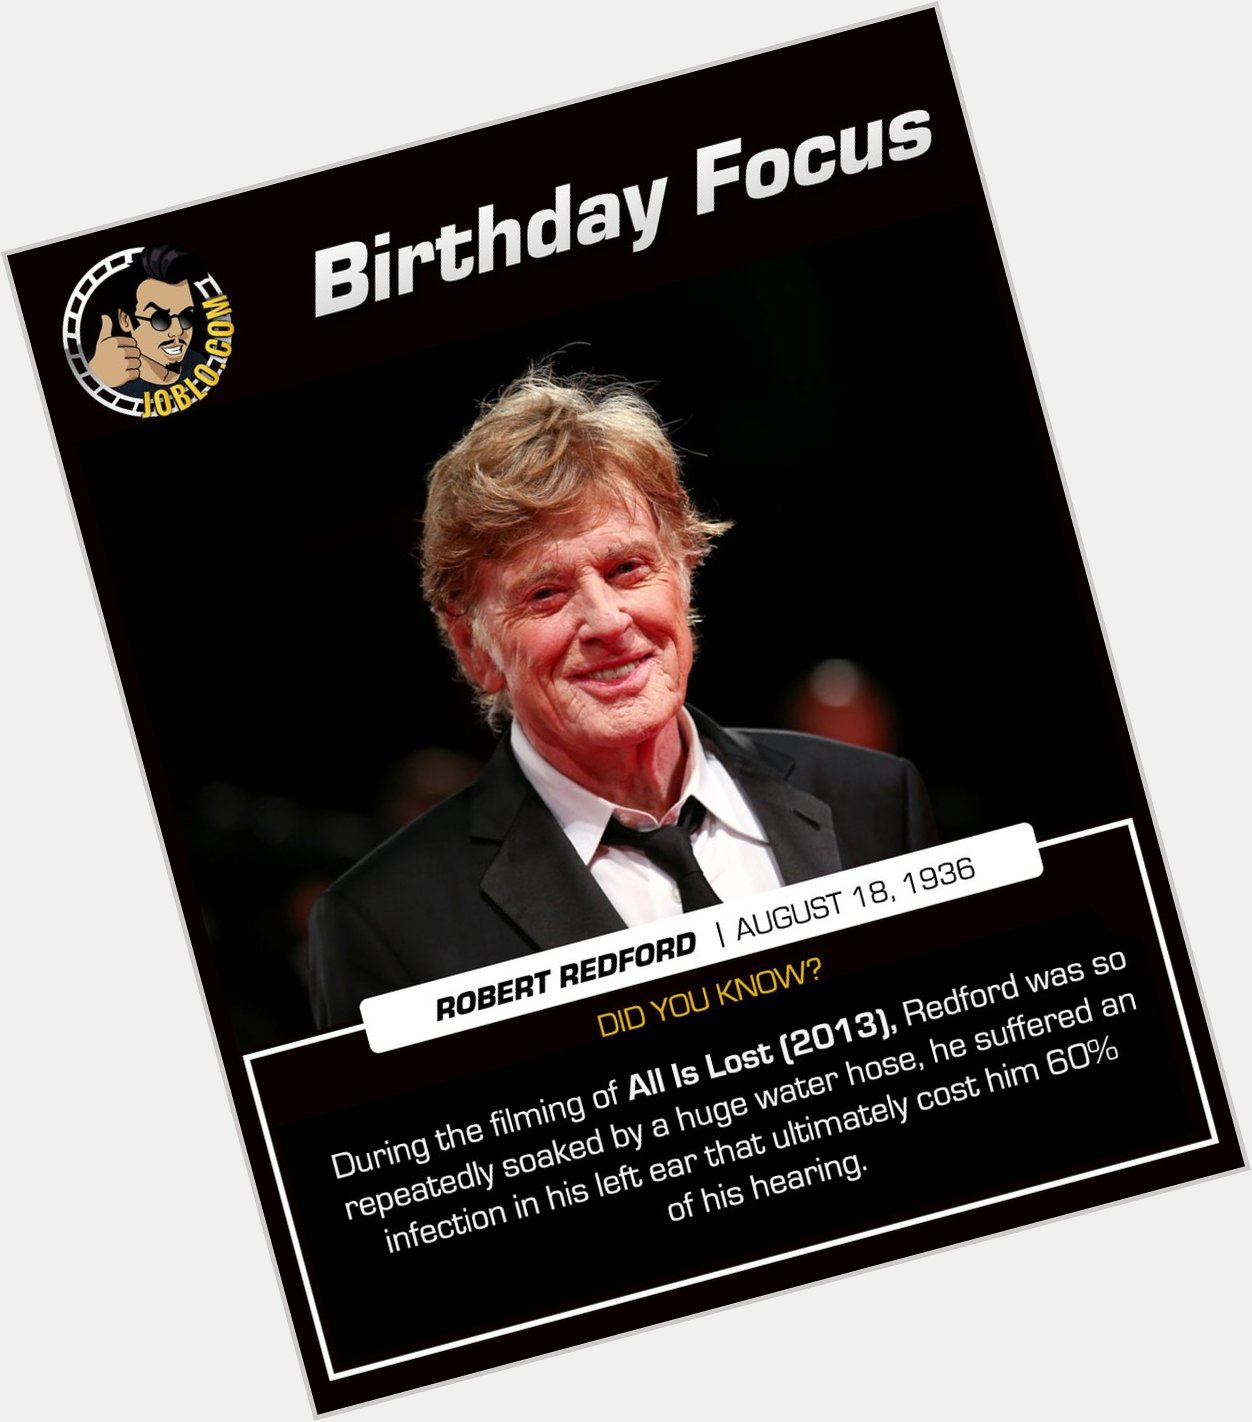 Wishing Robert Redford a happy 84th birthday!

What do you think is his best performance? 